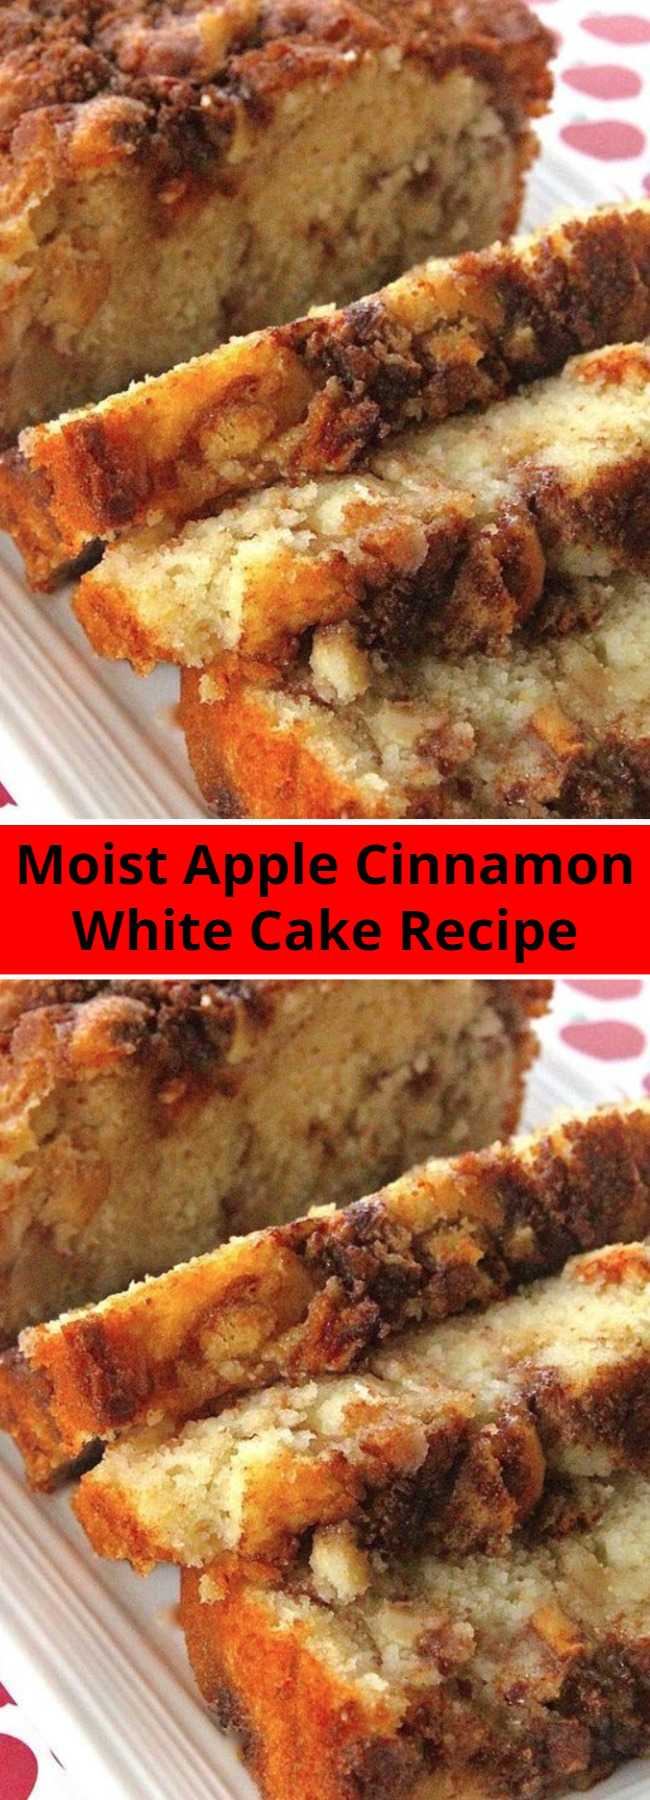 Moist Apple Cinnamon White Cake Recipe - A buttery white cake that comes together in minutes but tastes like you spent all day making it. Adding apples and cinnamon with brown sugar in layers makes this cake into an autumn delight. A scoop of ice cream is especially good with this cake.